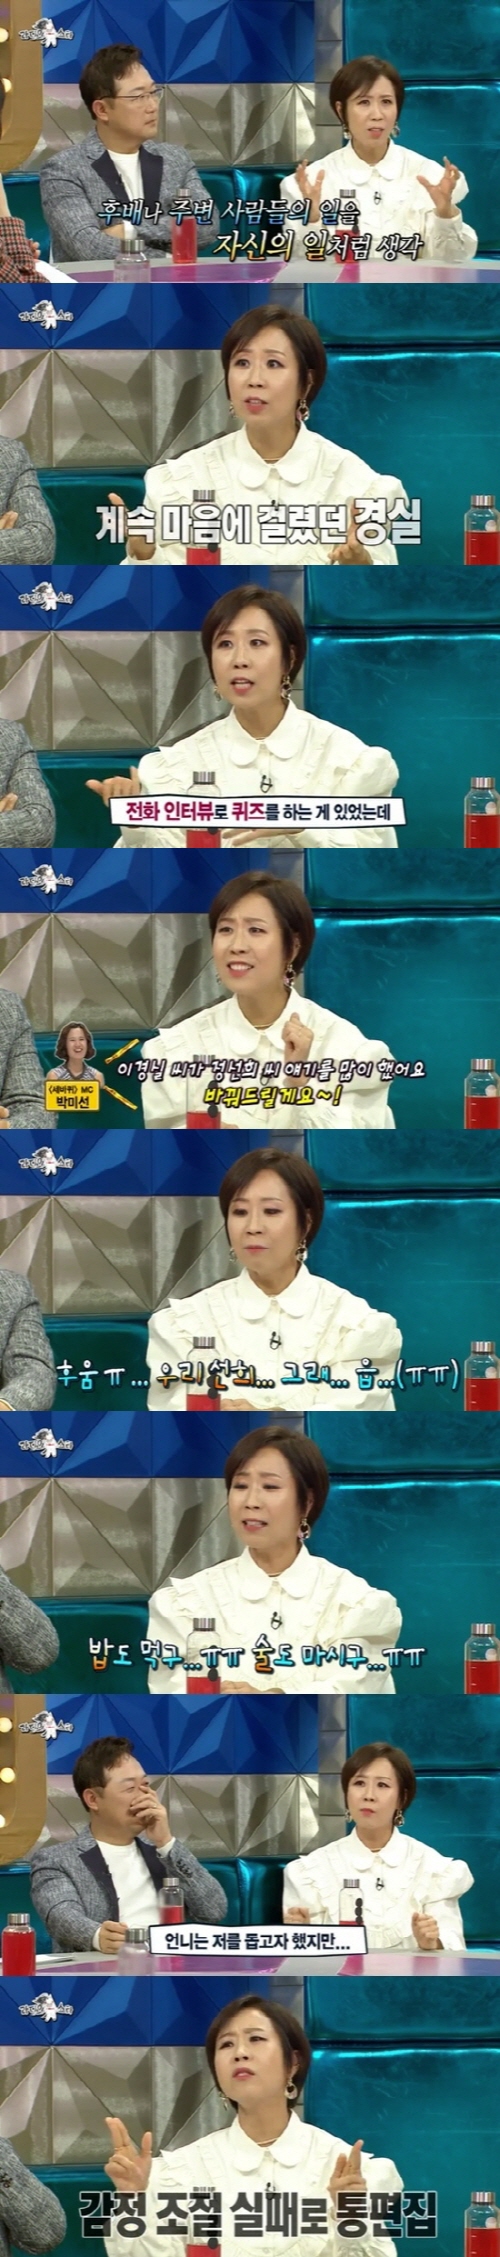 Radio Star Jung Sun-hee reveals episode with Kyeong-shil LeeMBC Radio Star, which aired on the 16th, was featured as a special feature of Listening TV! Audio Star, starring Ahn Ji-hwan, Jung Sun-hee, Yoon Min-soo and Jang Ye-won.Jung Sun-hee, the first appearance of Radio Star, said, Its strange: its completely different from the golden fish field Ive been working on and Radio Star itself is inconsistent with me.I dont like Gim Gu-ras offensive talk very much, said Gim Gu-ra, who denied it, saying it was a lot dull.Jung Sun-hee said, Every time I met Gim Gu-ra, I wondered when that pig dog would disappear.I just ran into him in the MBC underground parking lot, and he came up with a very mild face and talked about how he was doing.I did not ask him, I had to take a bath. I thought he might smell after years.Ive carved it, five, six, three years, and Ive done it this way, and its 25 years since I scratched it all, he said, DJ of MBC radio Now is the Radio Age.There are not many people in the story of Now Radio Age. I have to implement animal farms with my neck, starting with dog sounds and chicken sounds.The laughing letter is so good that we started to put on the flesh and make animal sounds.If you have a story of meeting an elk in the mountain, you can finish the I met an elk in one line. It is the joy of the writers to make 12 lines by adding an elk vocalization.Mooncheon-sik makes a lot of machine sounds such as cultivators and dental suctions. Jung Sun-hee is said to have become a hot topic thanks to his best friend DJ recently.Jung Sun-hee said, I went to YouTube broadcast by Kyeong-shil Lee and told him that Hwa-Jeong Choi had a consultation, not a consultation.So it suddenly became a lot of talkers. If you live in entertainment, you will suffer a lot of bad news.Idol Friend comes and has time to spare when the (middle radio) ad and song go out, so I dont like it these days, people dont even want to know about me and they make a bad call.I cant live, he said.Hwa-Jeong Choi also picks heavy topics lightly, always modifying his face with a compact. Oh yes.Its annoying that people dont know anything about you. But think about it. People dont know you. Like backwards?But I do not know you and I like you. He said, Hwa-Jeong Choi vocal cords. The Kyeong-shil Lee vocal rendition also continued.Jung Sun-hee said: There are a lot of hot and passionate people around me. Kyeong-shil Lee is very hot. You can think of it as a furnace.When I have a hard Sigi, I feel more sick than I am and I am more angry than I am.I am constantly resting on the air, so I recommend you as an acquaintance when you are interviewing and quizzing Three Wheels in order to remember Jung Sun-hee.Sunhee should show his face and voice like this, the production team was impressed and OK. I was just on Friends birthday and called to eat outside.I got a good quiz and I was good at interviewing. I changed the phone and it broke as soon as I said Sister. Our Sunhee, yes, Eup, turn around (Daughter) and eat rice and drink, and the atmosphere of the scene became cheap.My sister wanted to help me, but I was edited because of the failure of emotional control. As this story was reported, Friends who like to be squeaky, including Kim Young-chul,I am at home and I see movies. He laughed at the funny episode.Photo: MBC Broadcasting Screen